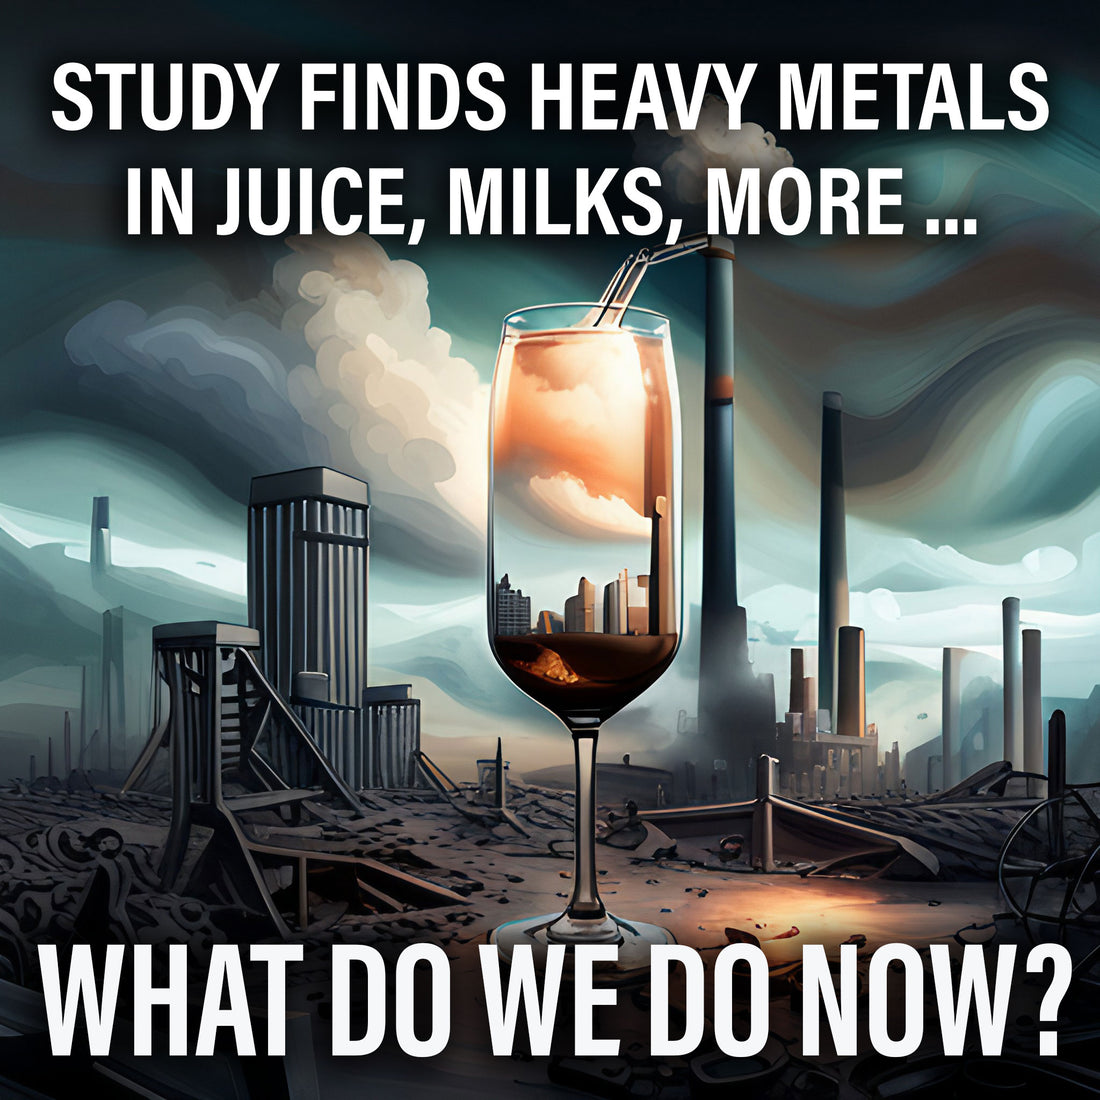 Study finds toxic metals in the beverages we all drink. Now what?